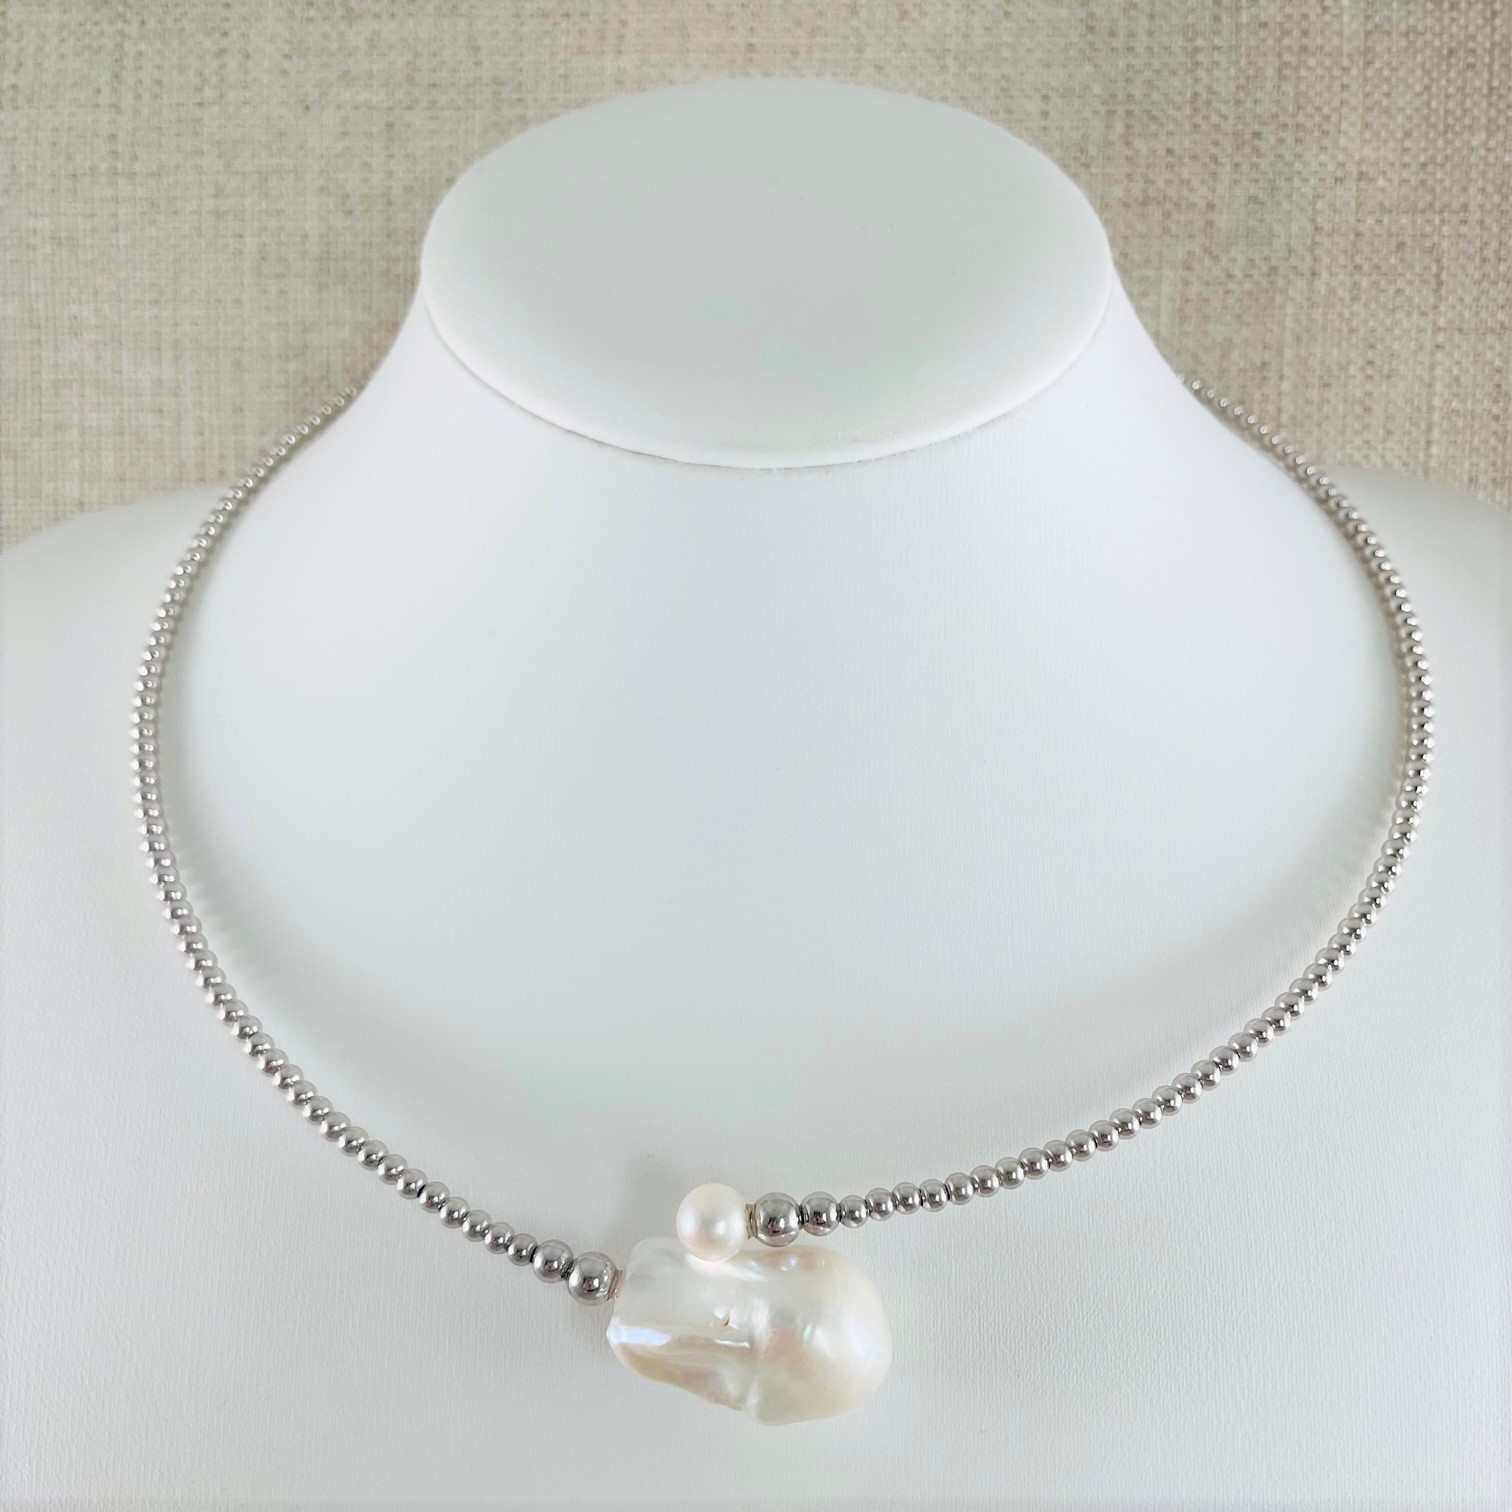 Doubled Rope Necklace of Natural White Baroque Pearls SKU N003